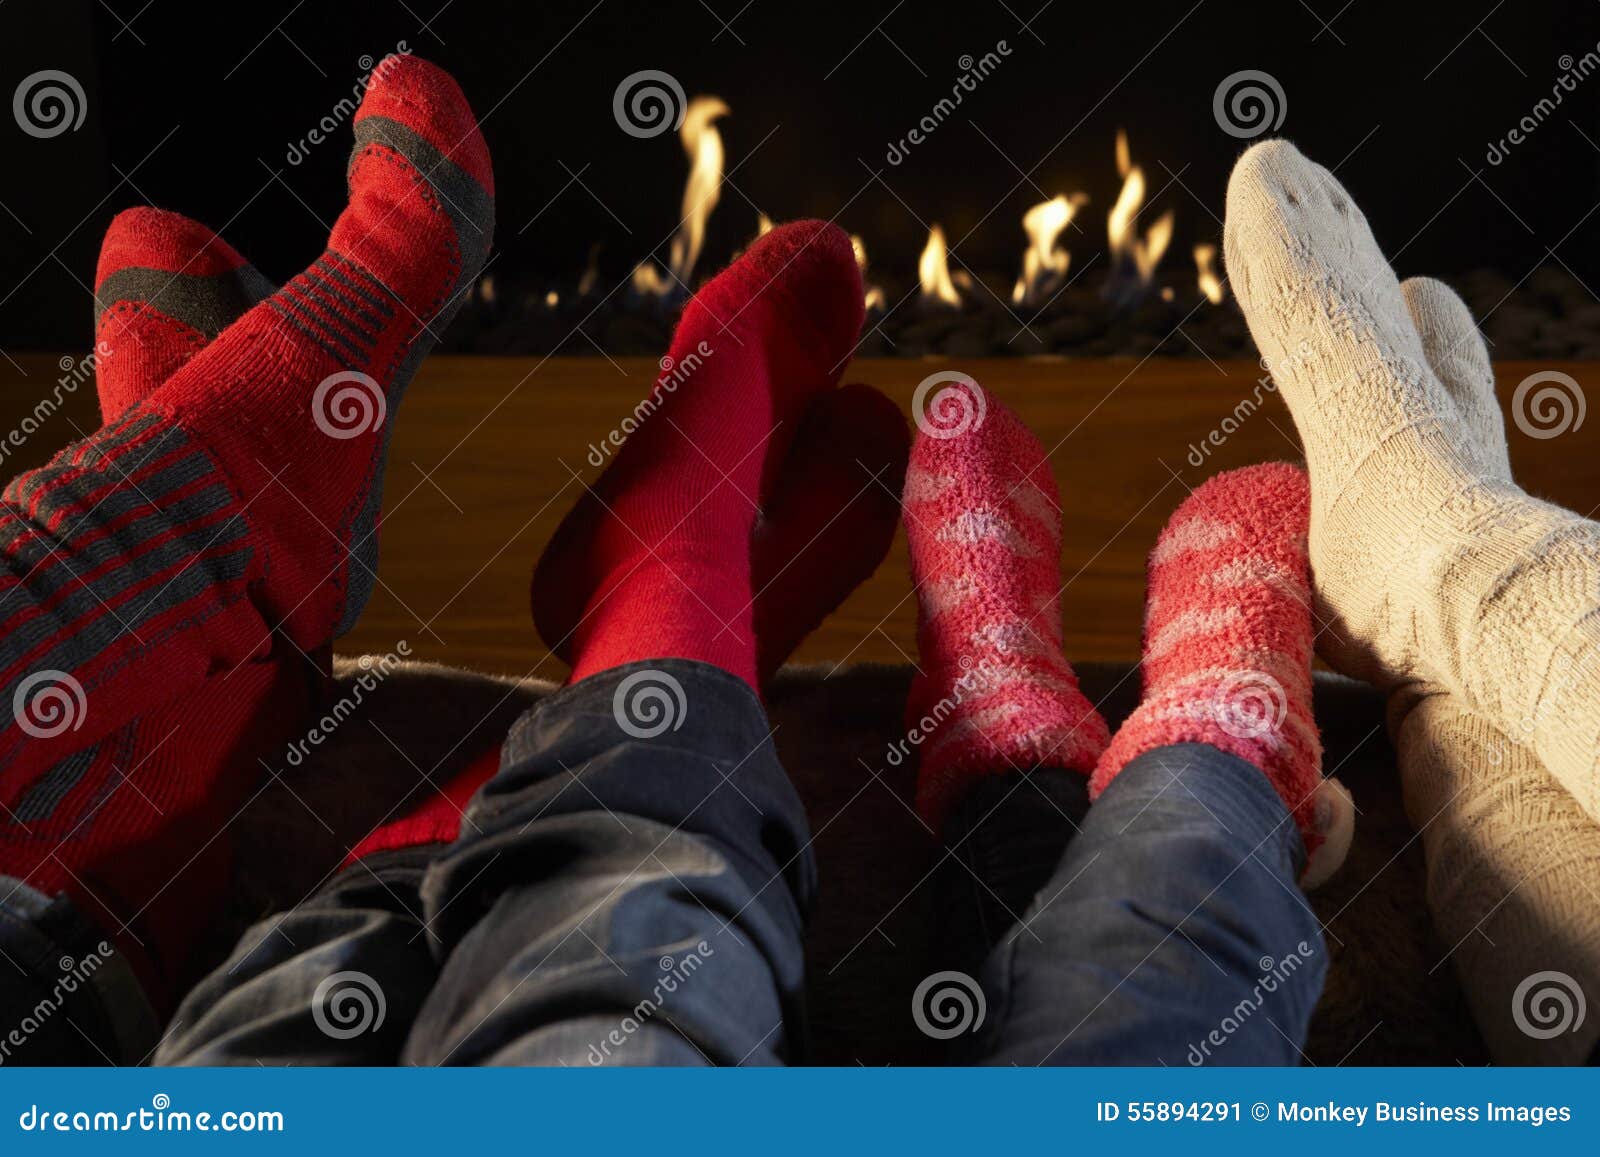 four pairs feet in socks warming by fire